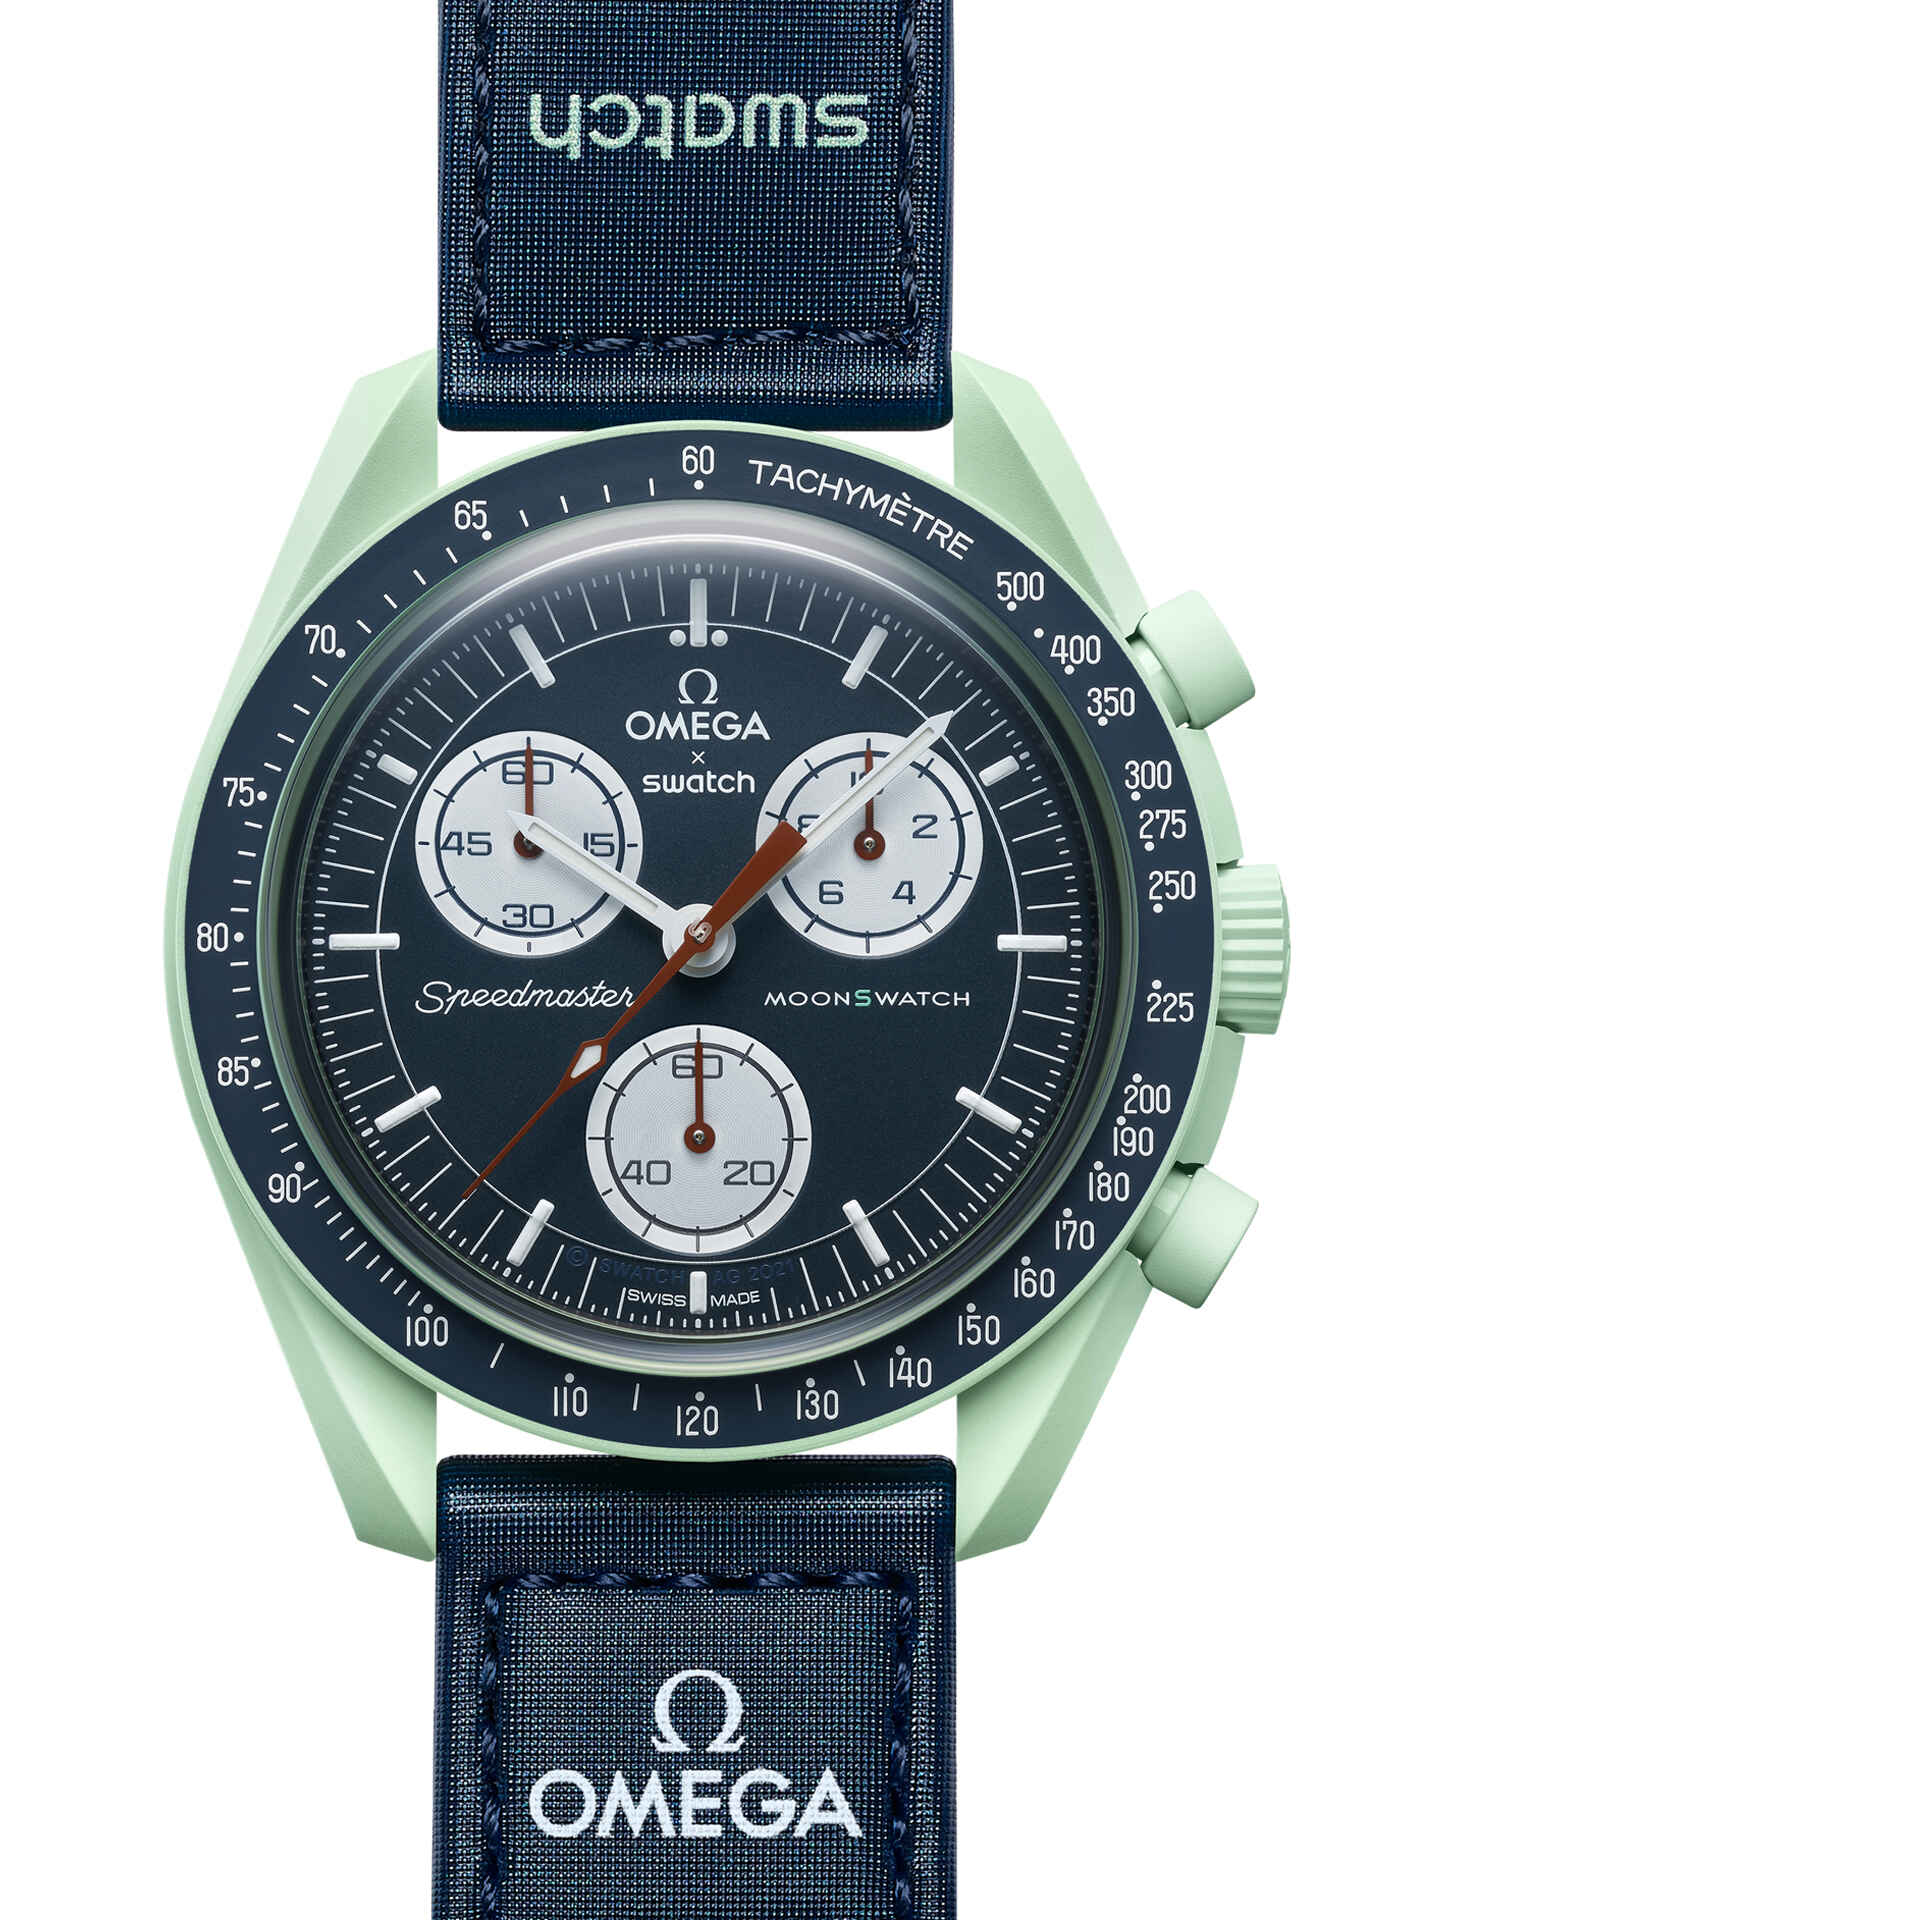 swatch omega mission on earth-